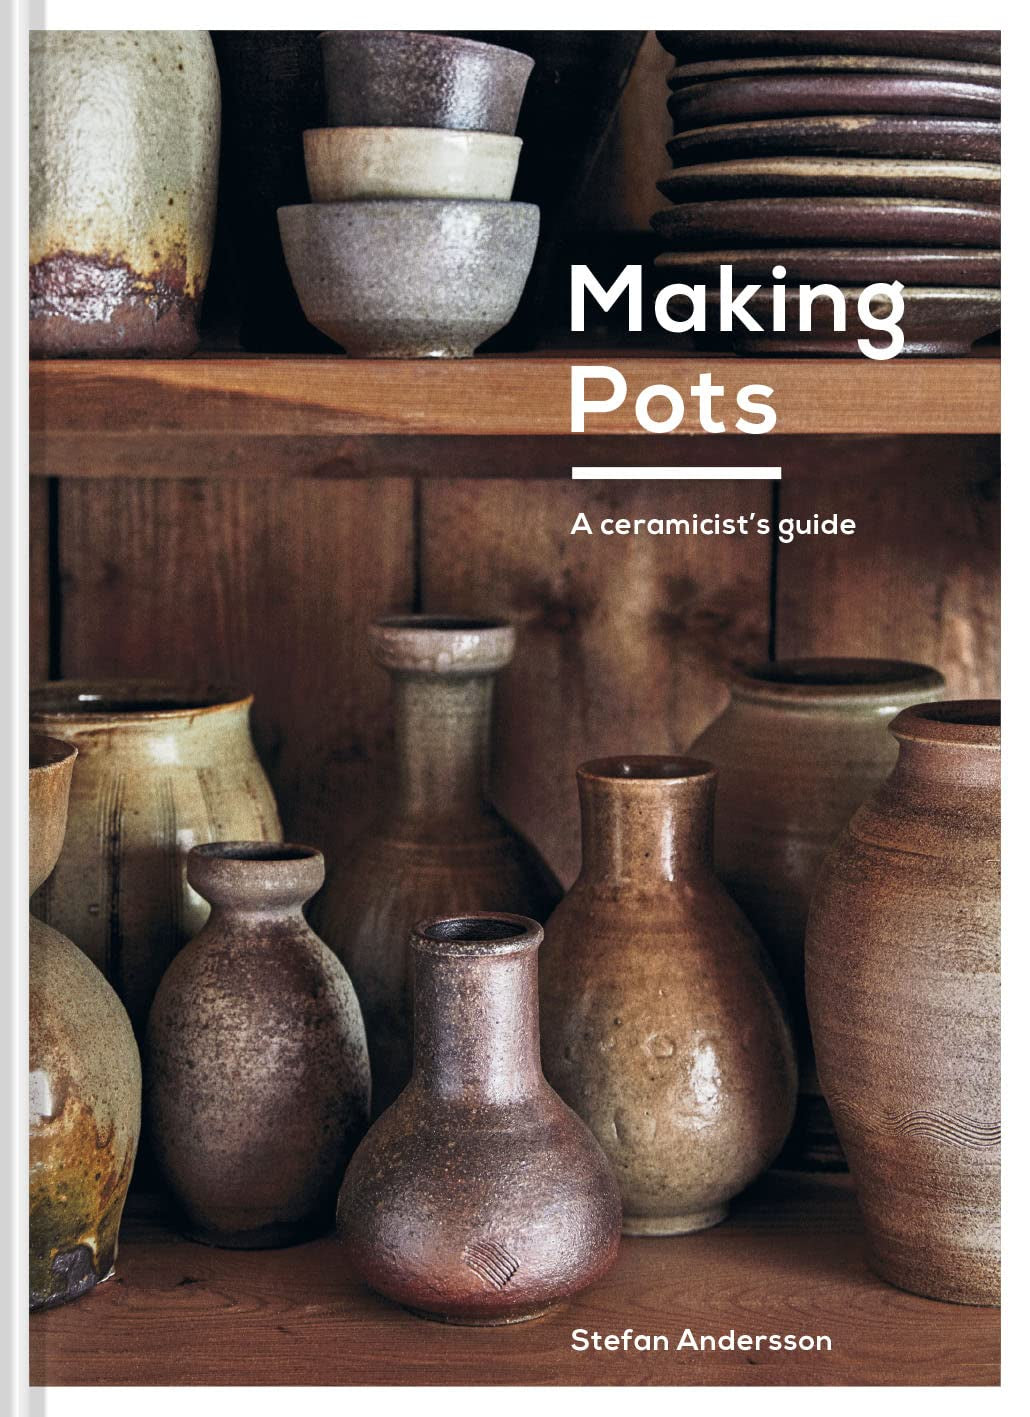 Making Pots: A Ceramicist's Guide by Stefan Andersson